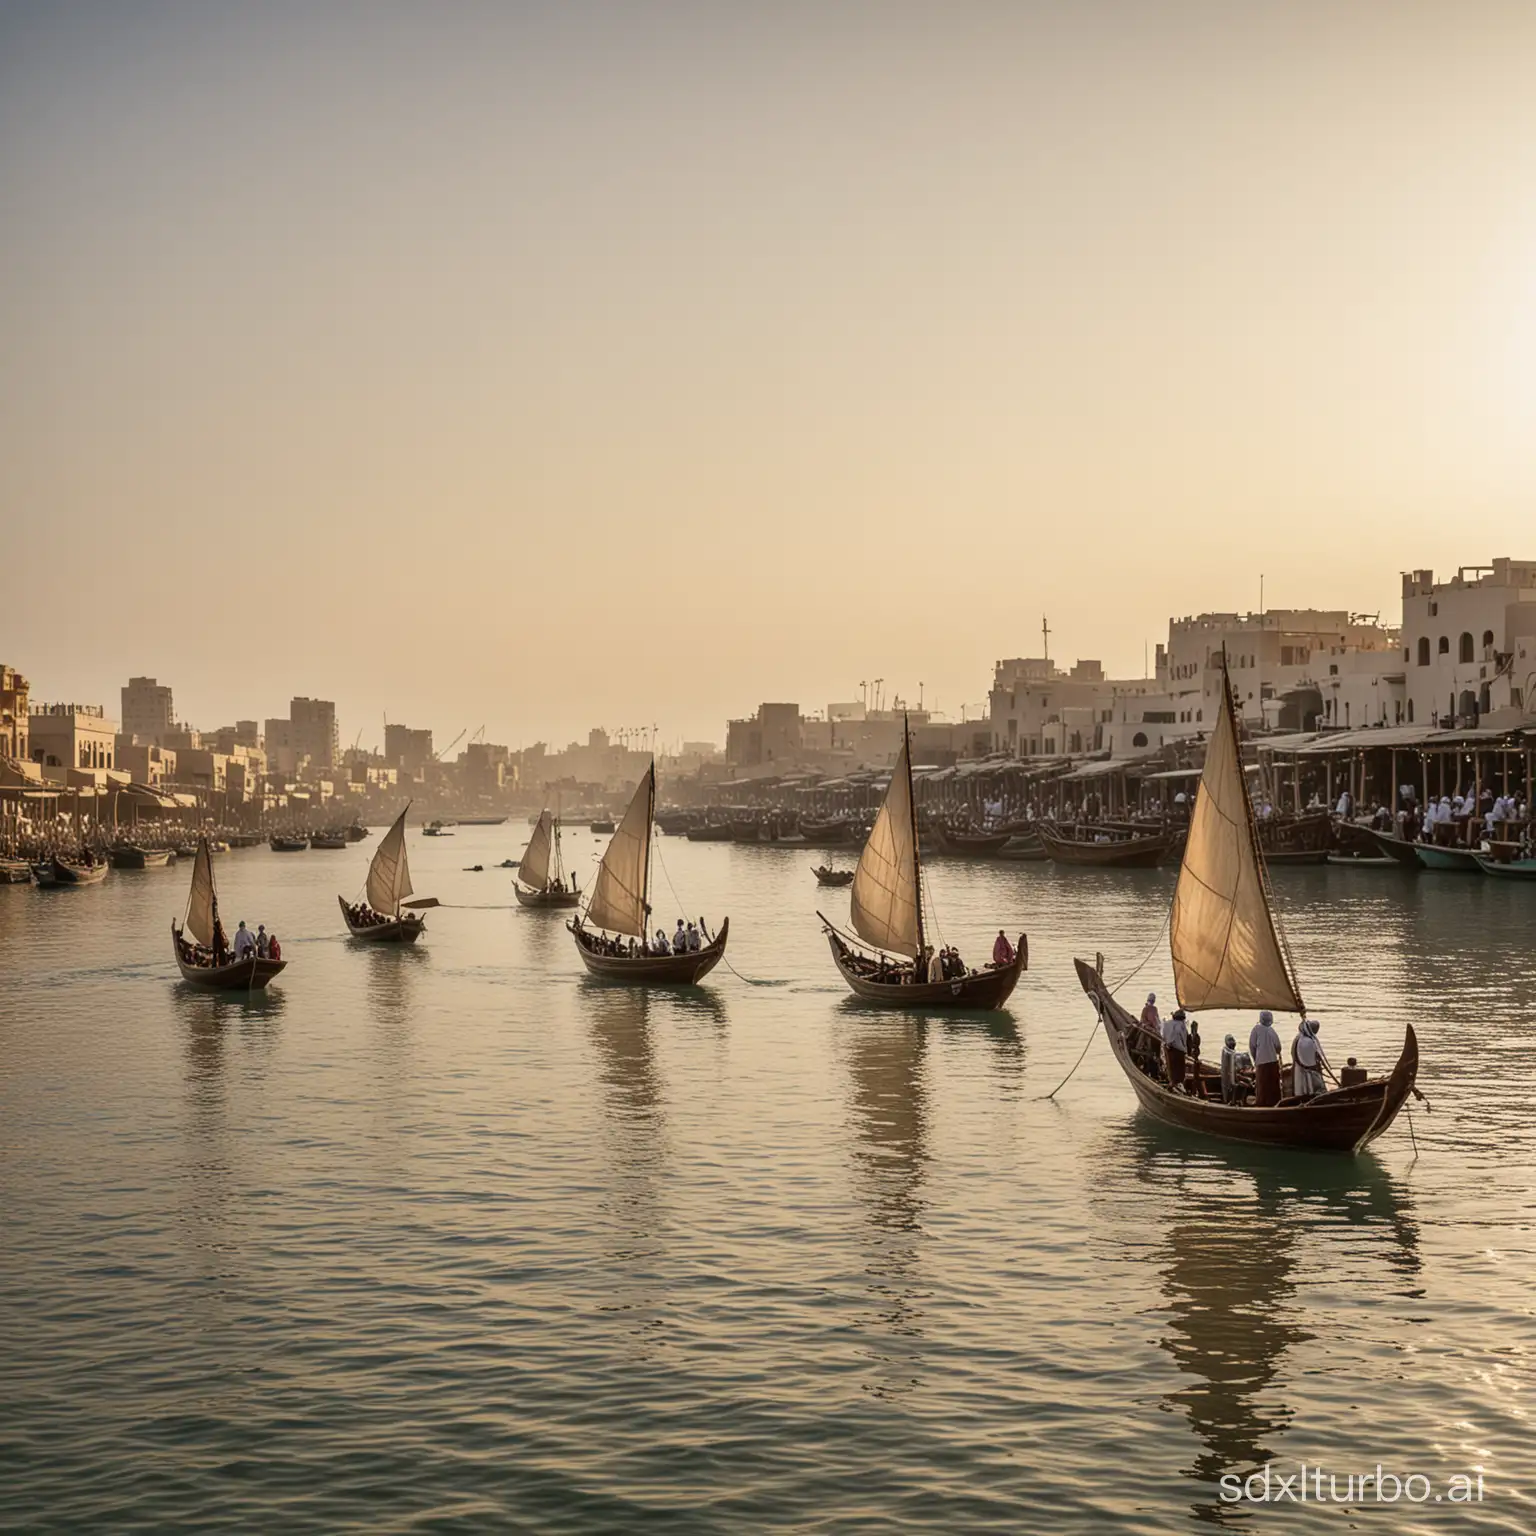 A fleet of ships or dhow with Arab pearl divers & fishermen setting off shore in early morning with an overview of the souq behind them